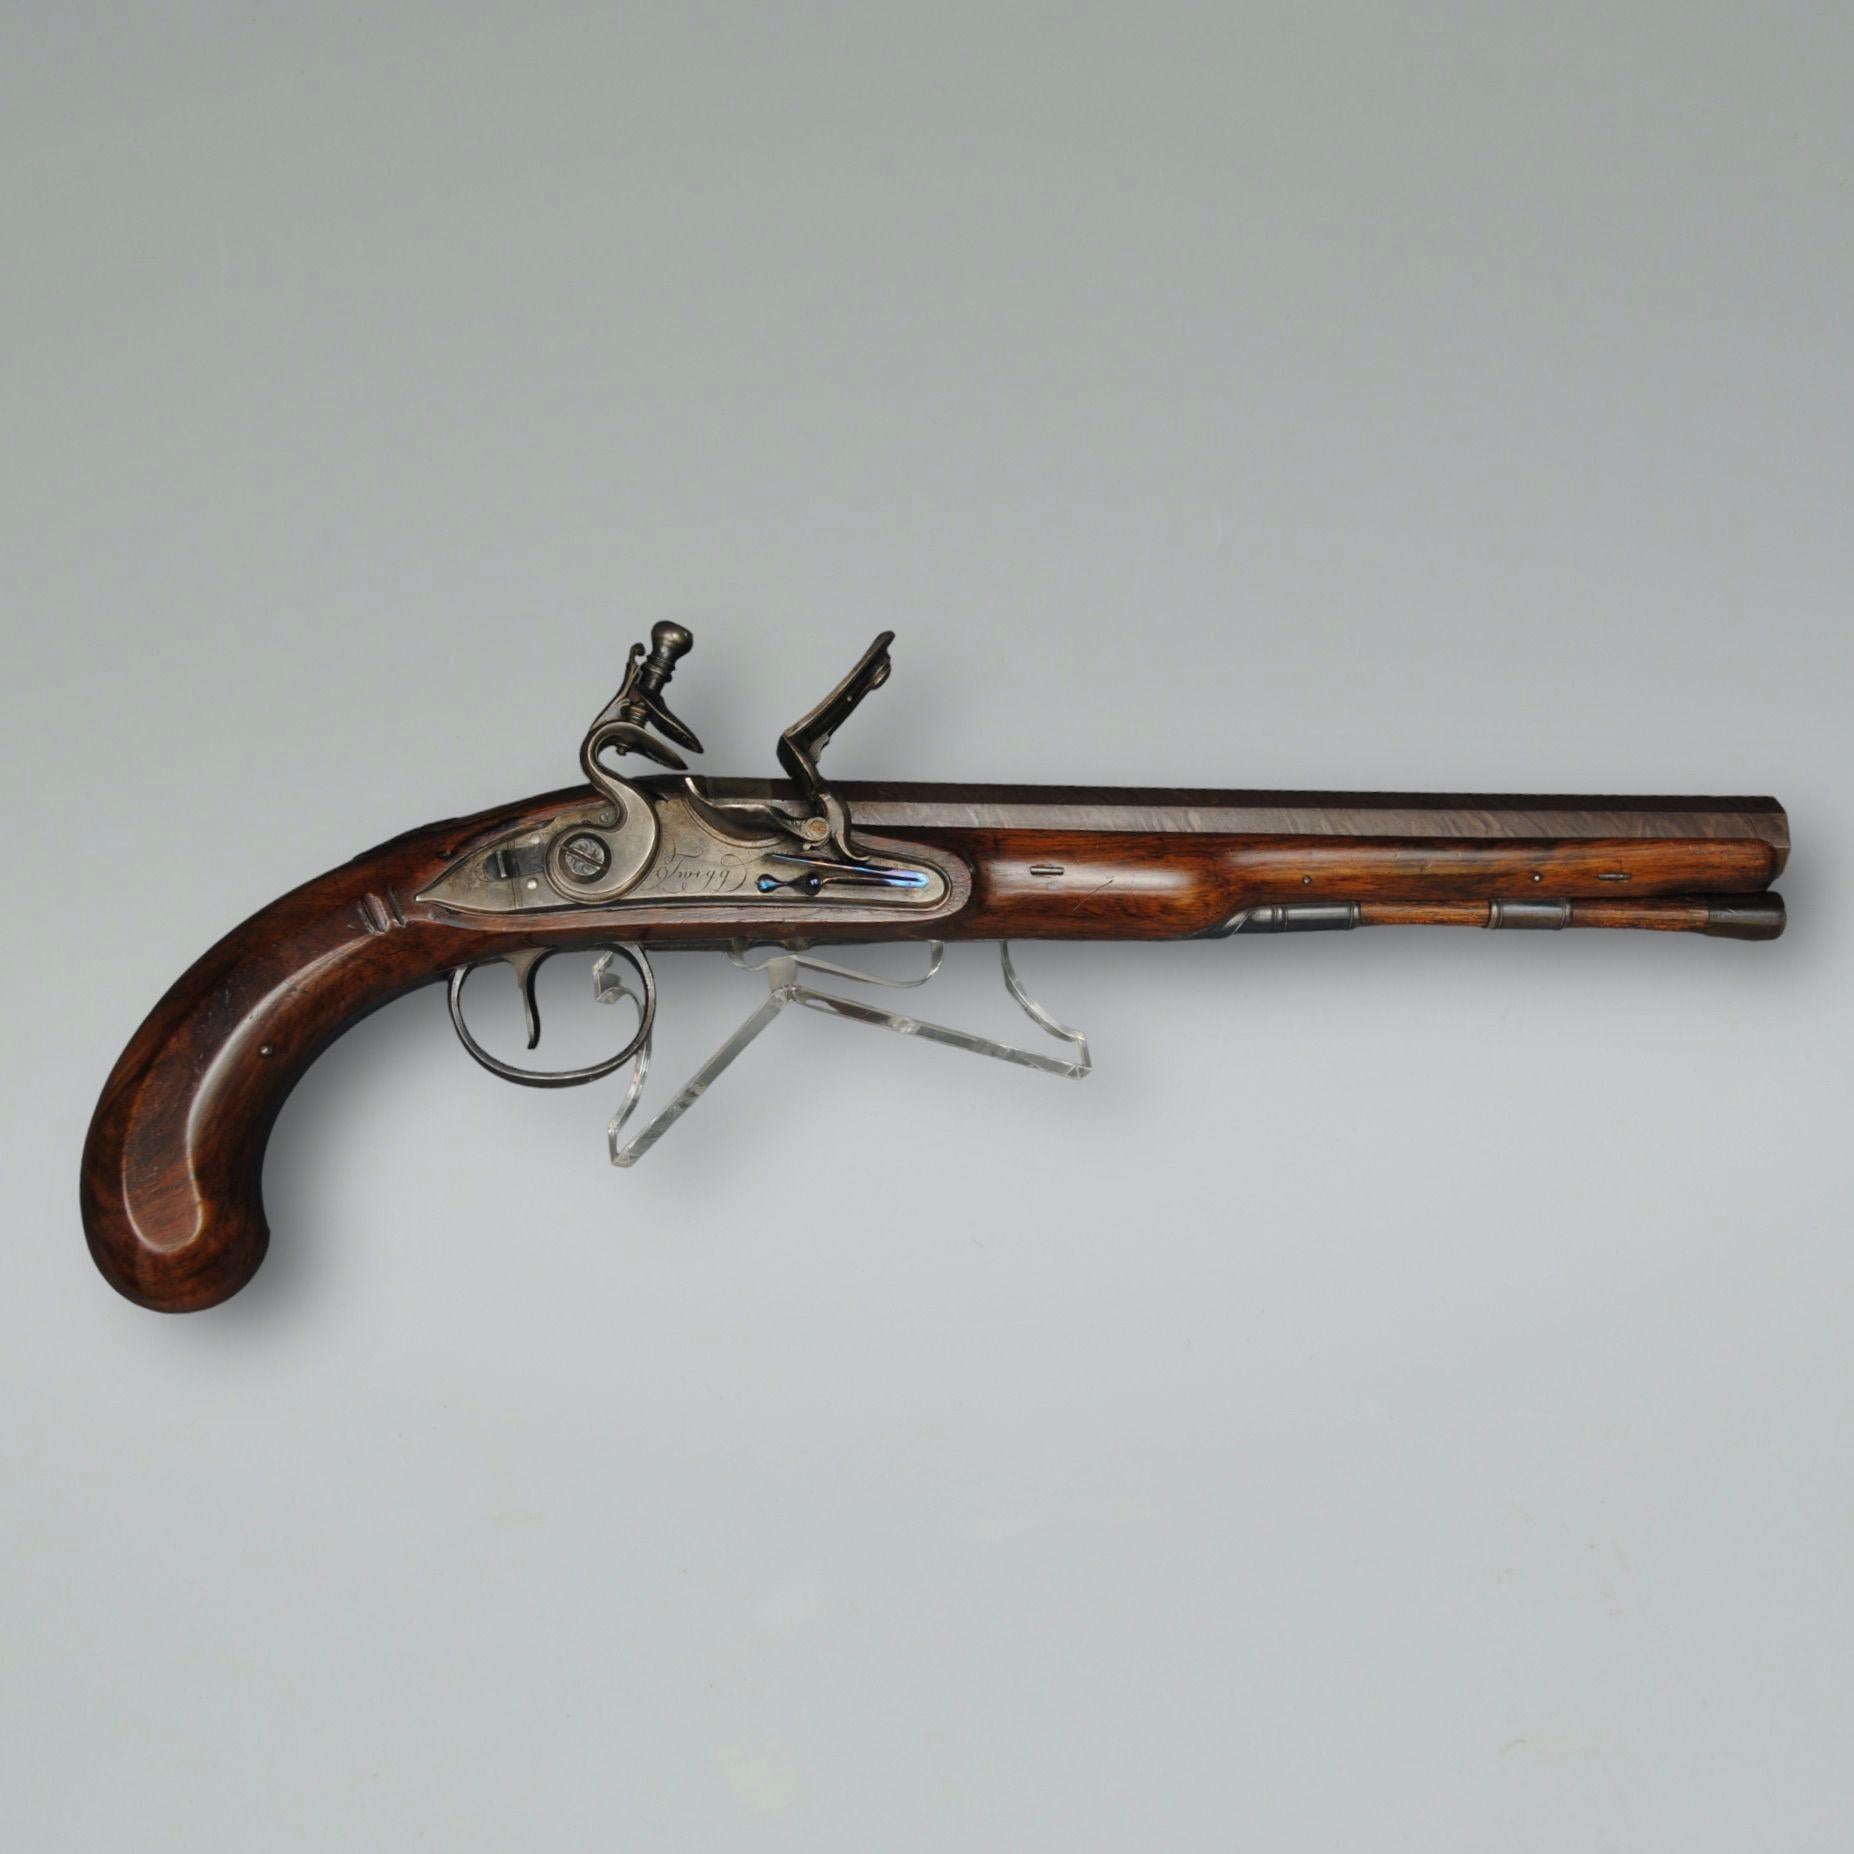 English A Fine Cased Pair Of Flintlock Pistols By Twigg